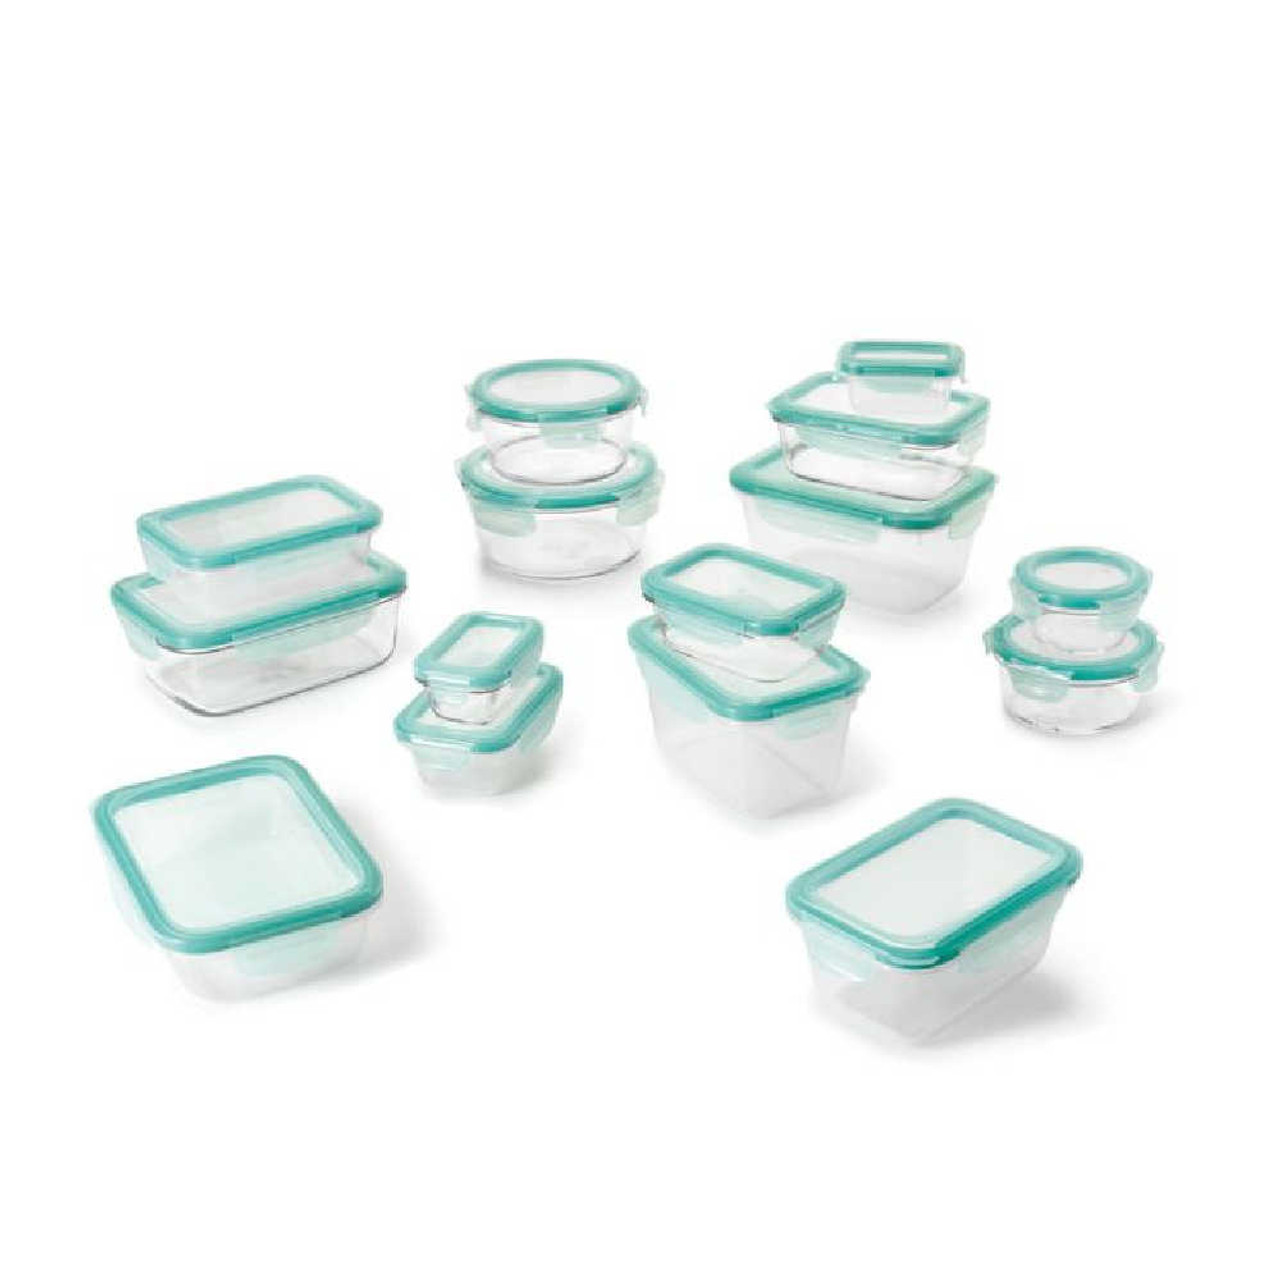 https://cdn11.bigcommerce.com/s-hccytny0od/images/stencil/1280x1280/products/4676/19063/OXO_Good_Grips_30-Piece_Smart_Seal_Container_Set_1__66619.1651594187.jpg?c=2?imbypass=on